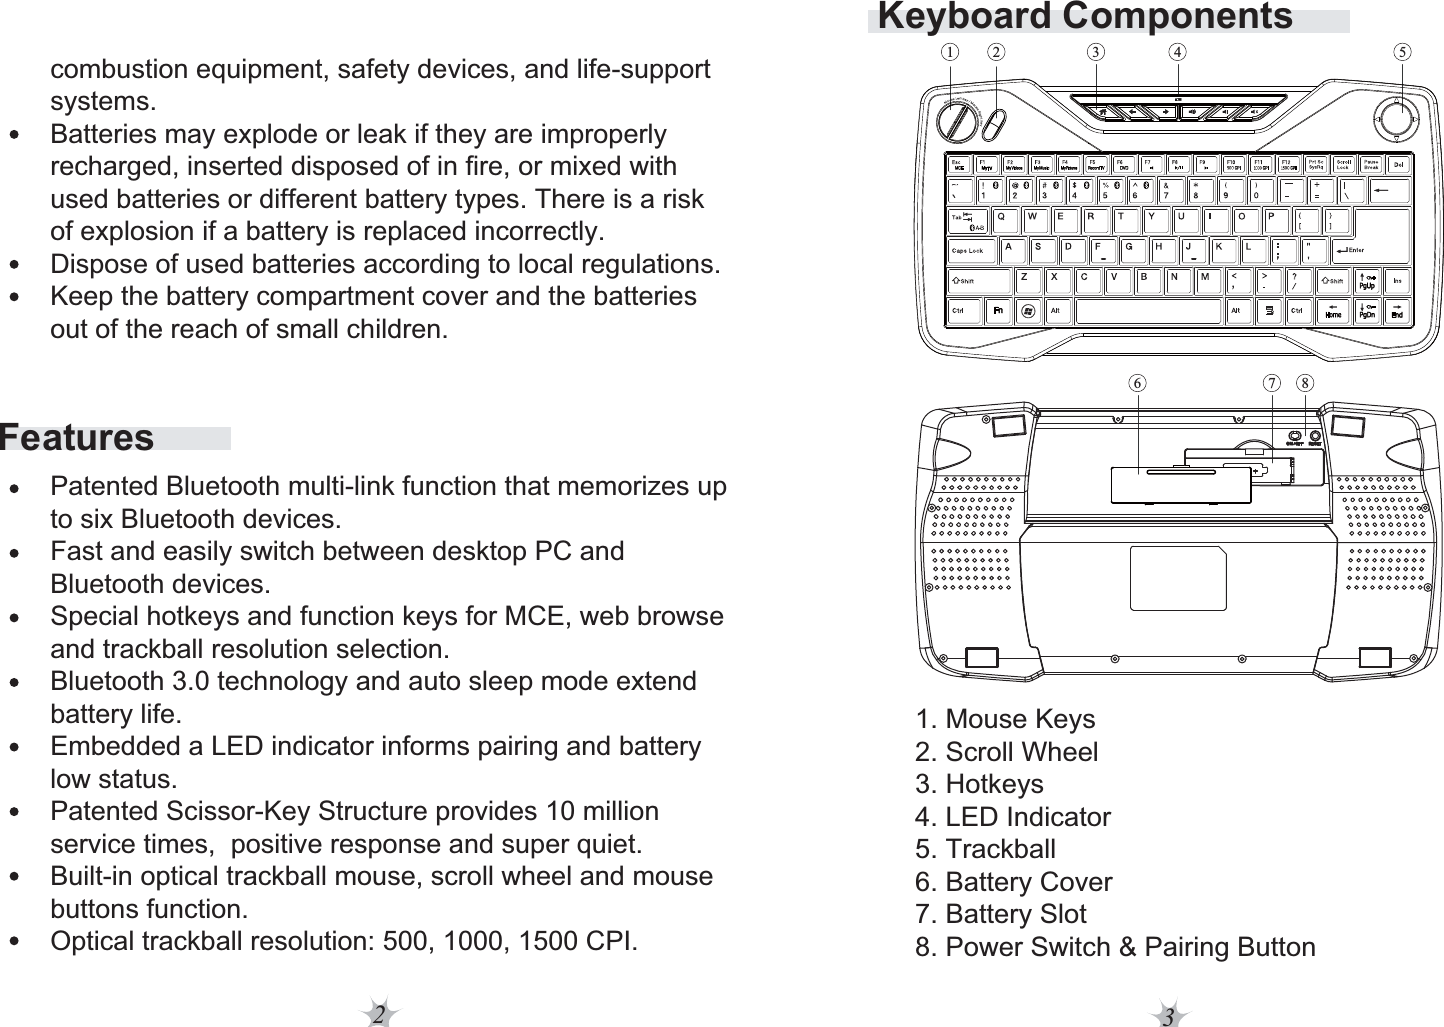 23Keyboard Components1. Mouse Keys2. Scroll Wheel3. Hotkeys4. LED Indicator5. Trackball6. Battery Cover7. Battery Slot8. Power Switch &amp; Pairing Button531 42876Featurescombustion equipment, safety devices, and life-support systems.Batteries may explode or leak if they are improperly recharged, inserted disposed of in fire, or mixed with used batteries or different battery types. There is a risk of explosion if a battery is replaced incorrectly.Dispose of used batteries according to local regulations.Keep the battery compartment cover and the batteries out of the reach of small children. Patented Bluetooth multi-link function that memorizes up to six Bluetooth devices.Fast and easily switch between desktop PC and Bluetooth devices.Special hotkeys and function keys for MCE, web browse and trackball resolution selection.Bluetooth 3.0 technology and auto sleep mode extend battery life.Embedded a LED indicator informs pairing and battery low status.Patented Scissor-Key Structure provides 10 million service times,  positive response and super quiet.Built-in optical trackball mouse, scroll wheel and mouse buttons function.Optical trackball resolution: 500, 1000, 1500 CPI.